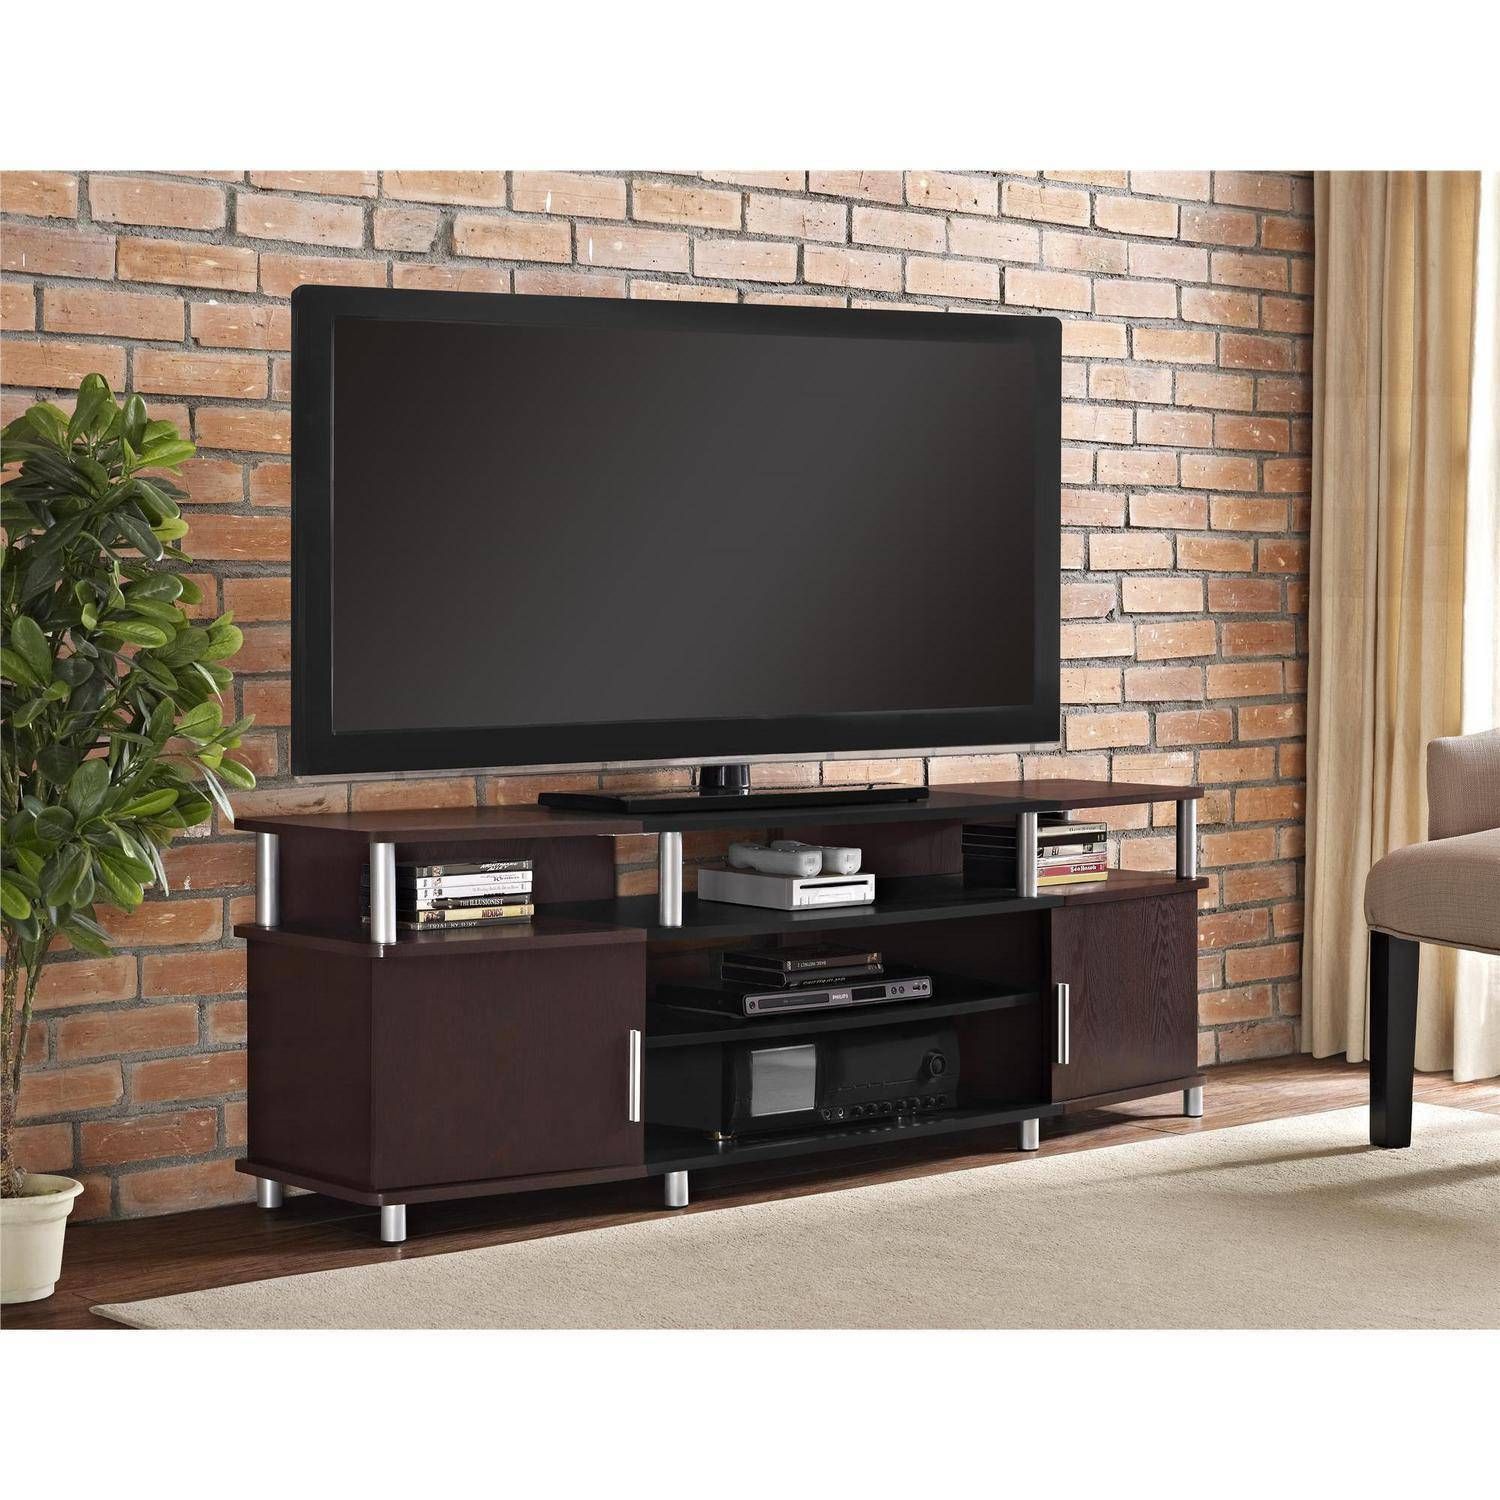 Best Tv Stands For Large Tvs | Home Decor Ideas Intended For Tv Stands For Large Tvs (Photo 1 of 15)